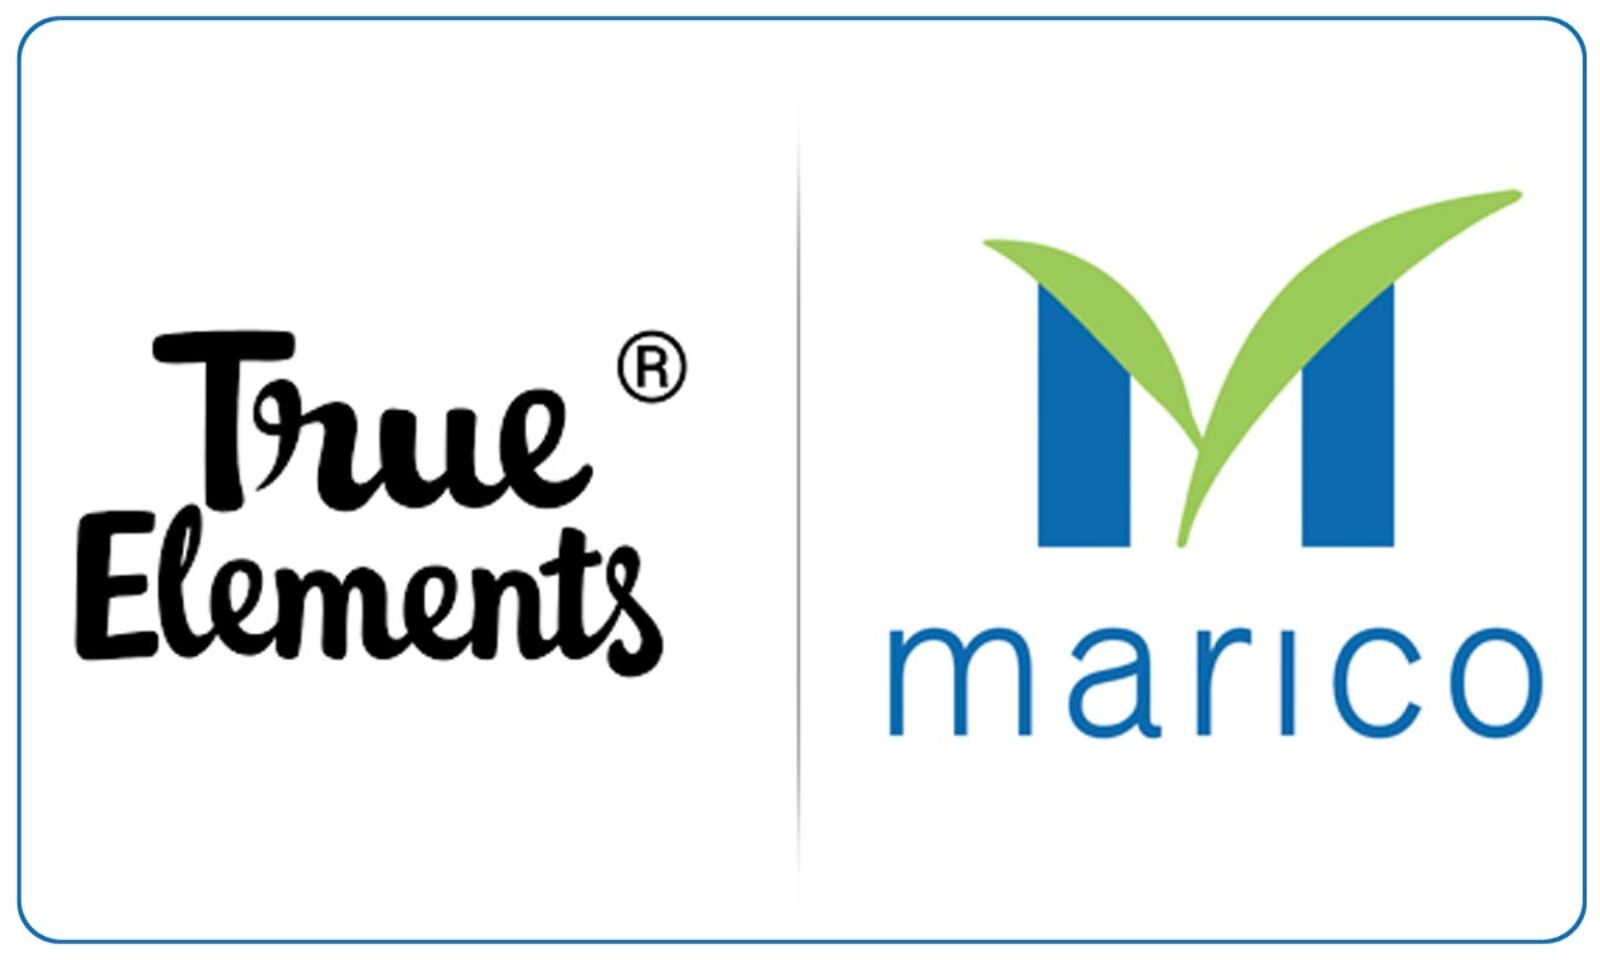 Marico acquires majority stake in True Elements, Marketing & Advertising  News, ET BrandEquity